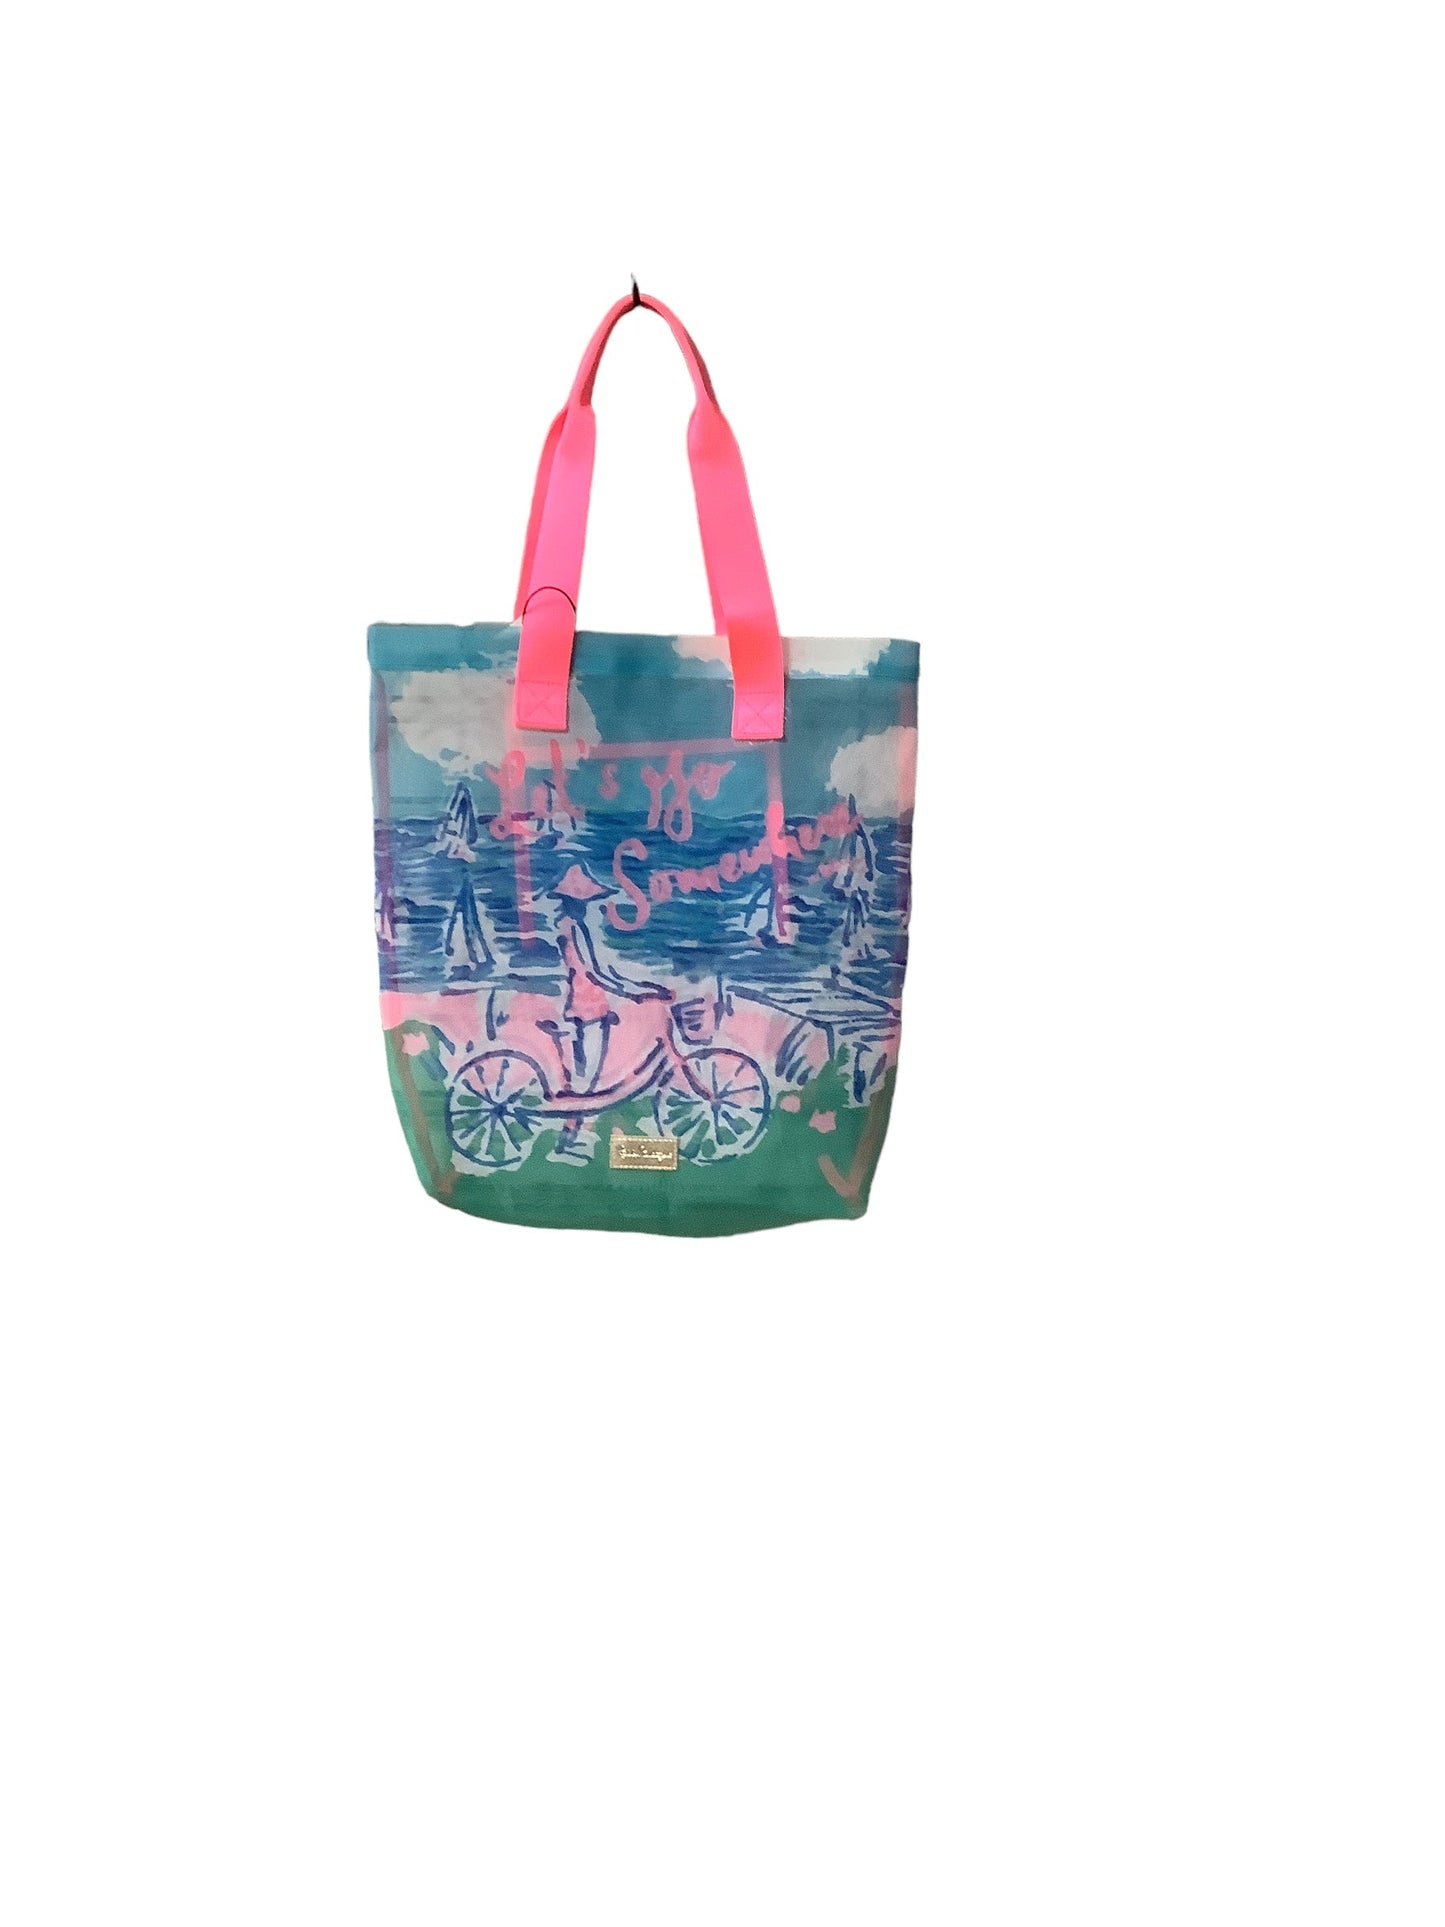 Tote By Lilly Pulitzer  Size: Medium